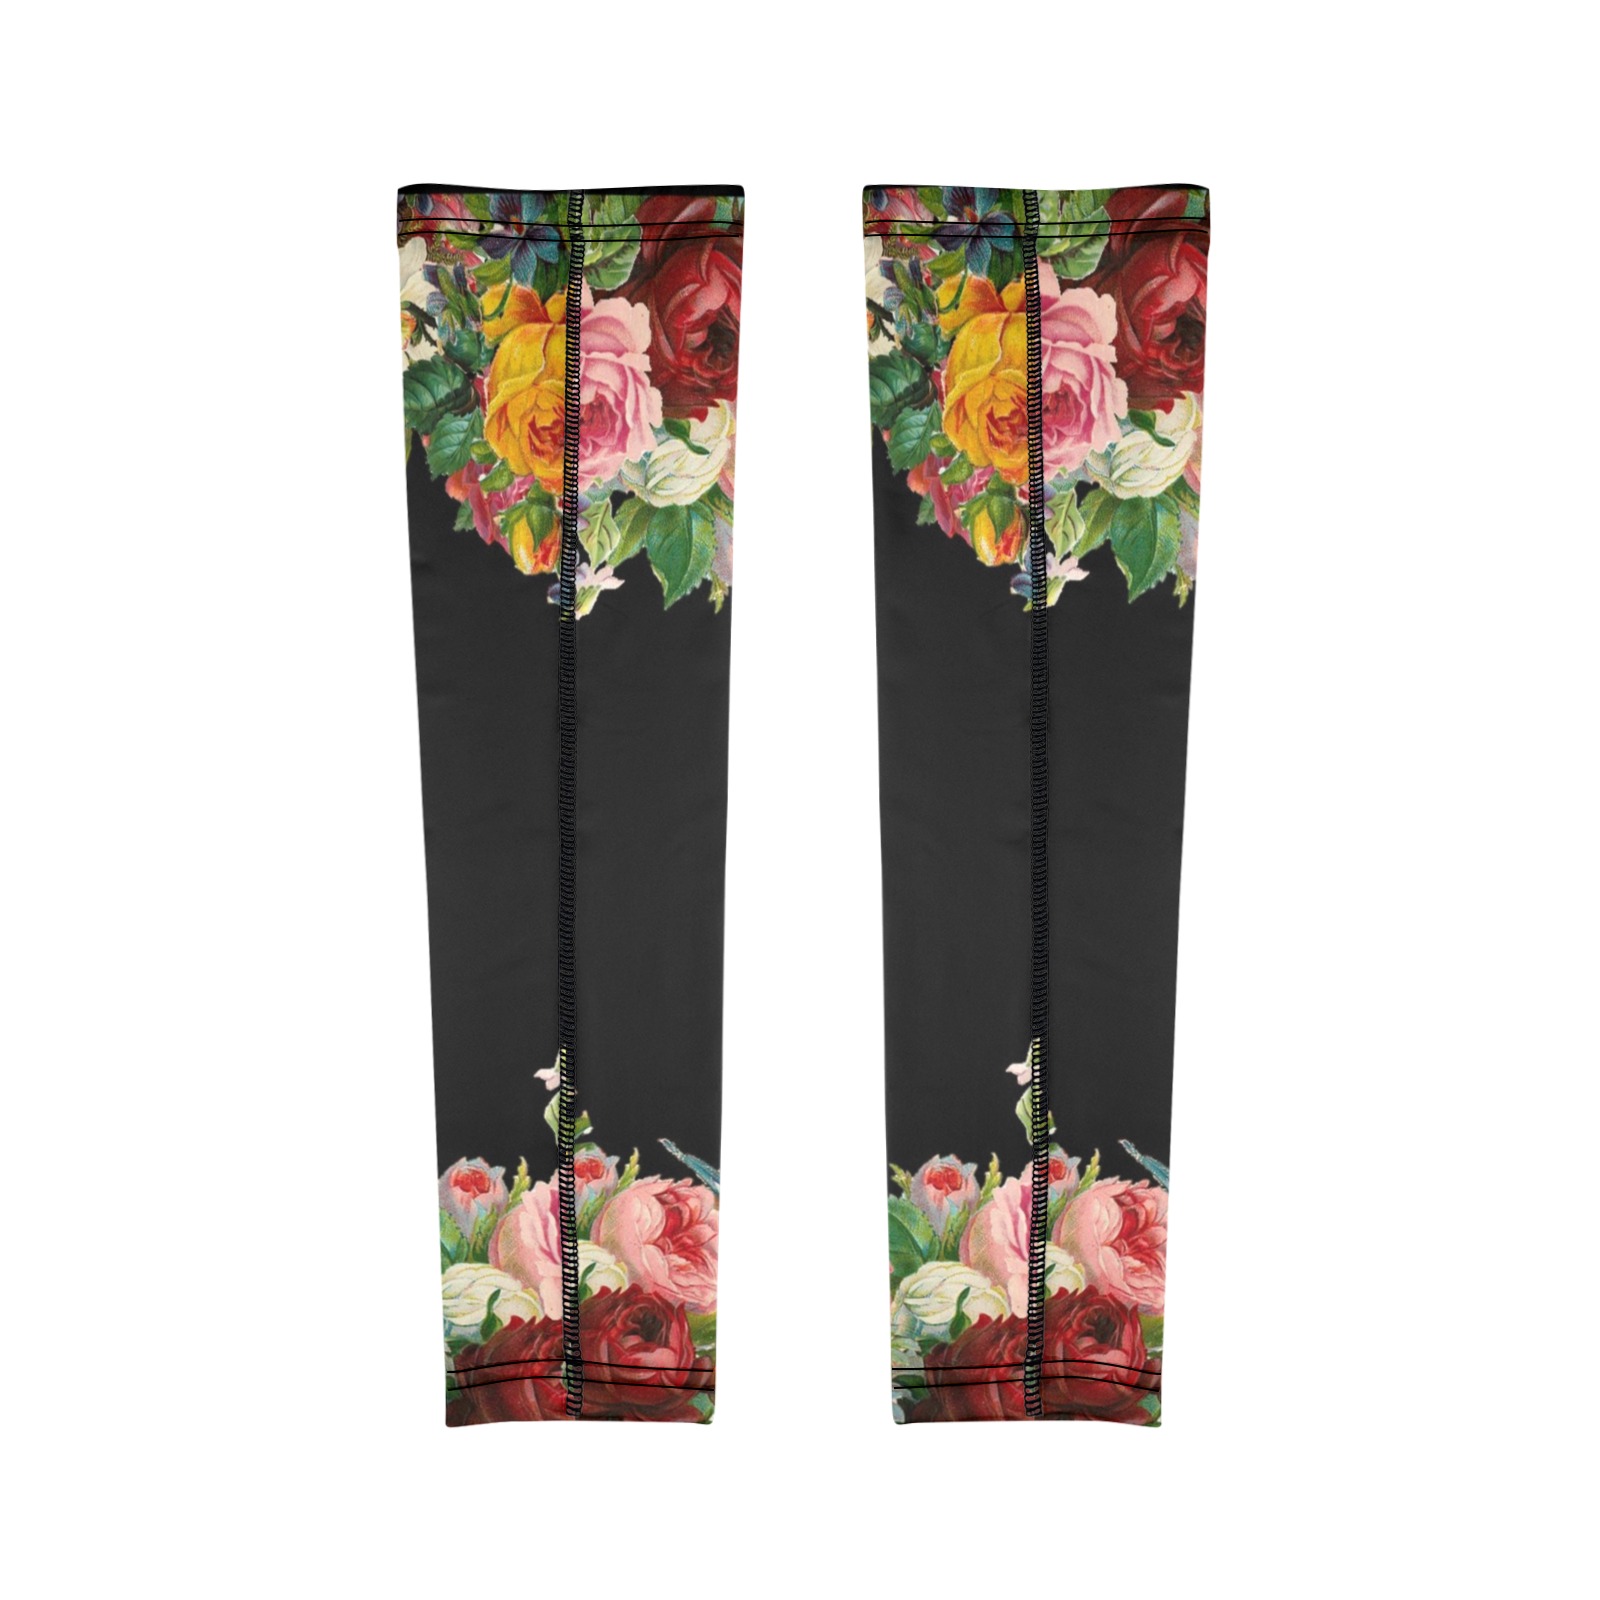 Vintage Roses Arm Sleeves (Set of Two with Different Printings)